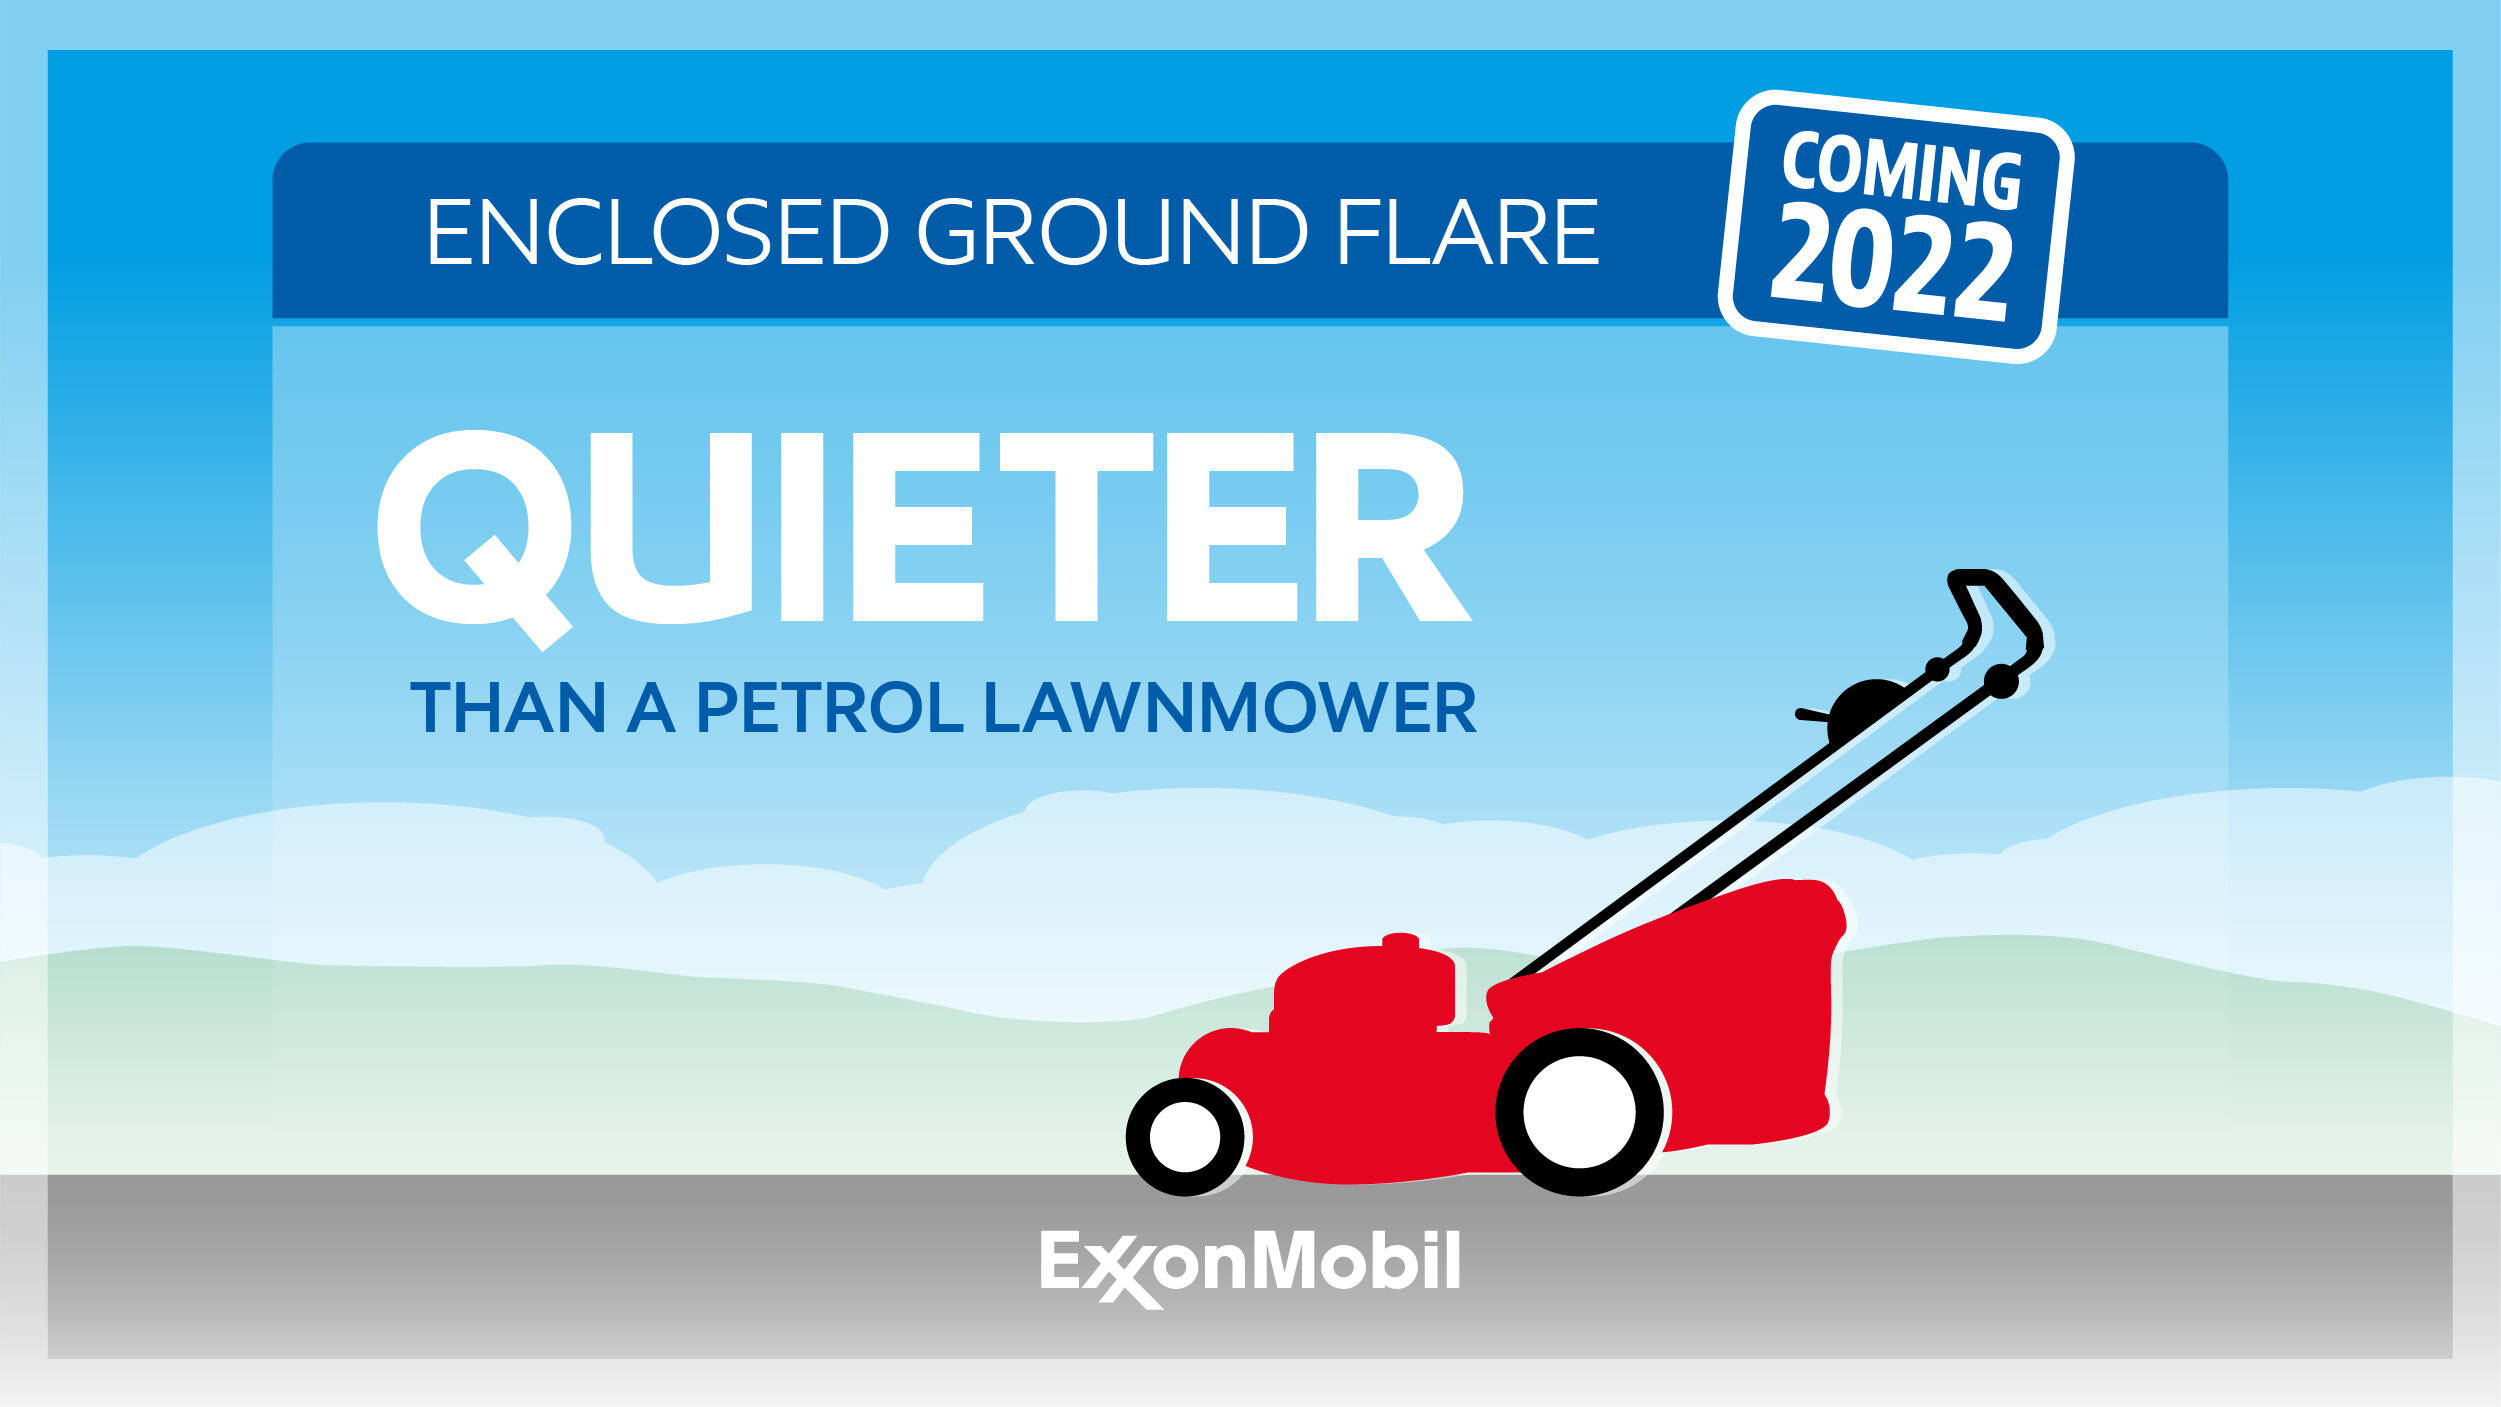 Our EGF will be quieter than a petrol lawnmower.
State of the art design means noise levels that can be experienced with elevated flaring is significantly reduced.